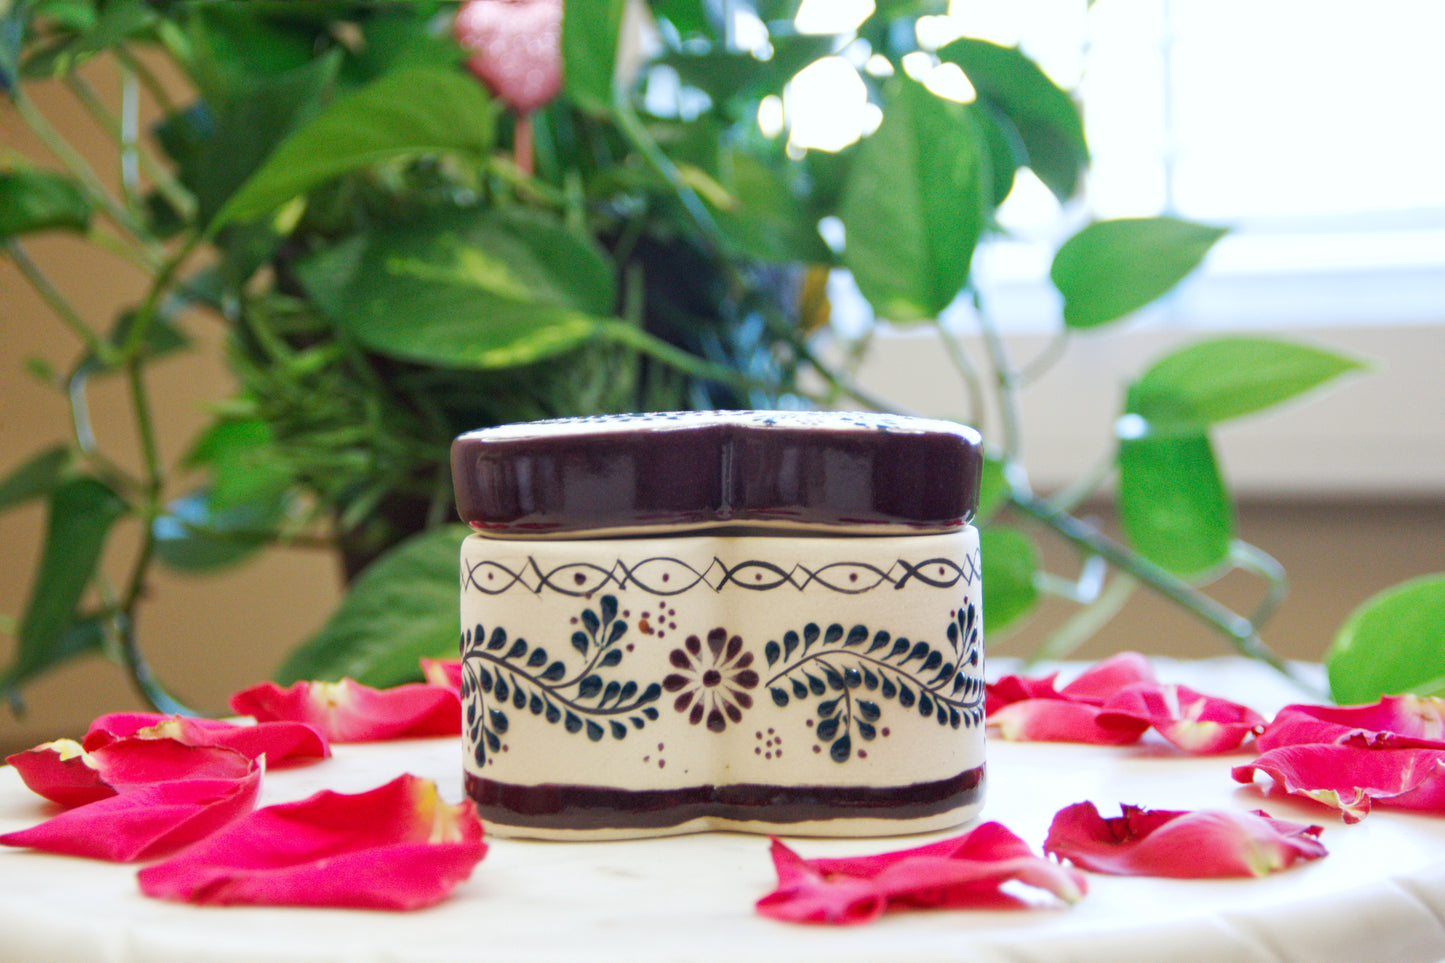 Artisanal candle in a beautiful heart shaped talavera. Handmade brown floral design with a closed lid. Handcrafted by Artisan in Mexico City. 100% All Natural Soy Candle. Reuse the talavera as home decor or storage.